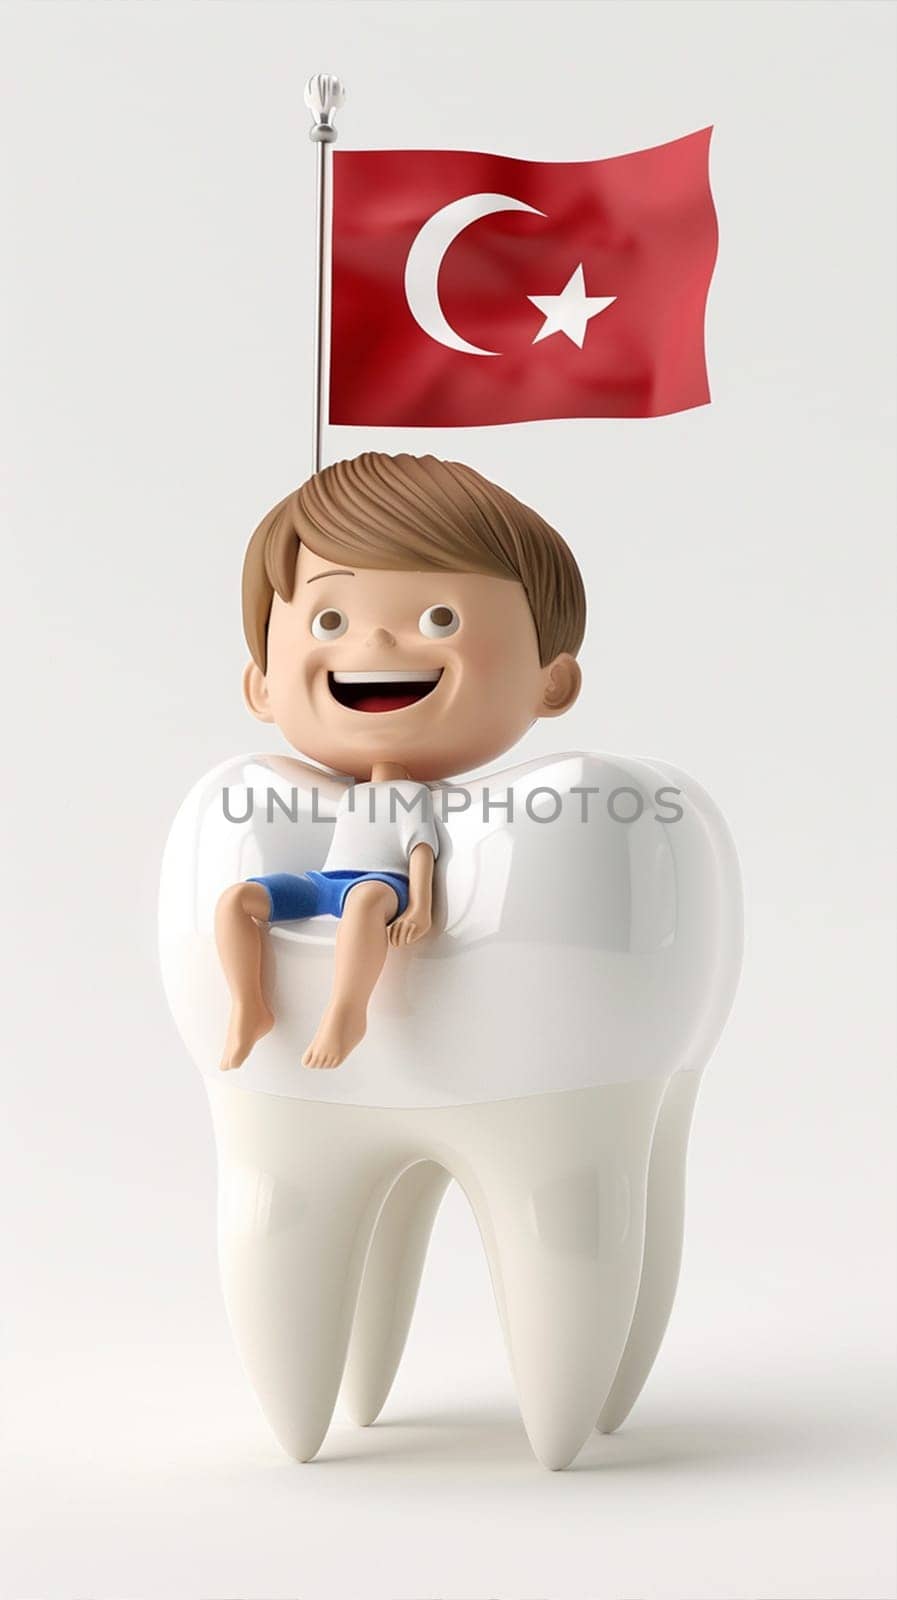 A boy sitting on a giant tooth with the national flag of Turkey. Symbolizing dental care, patriotism, and travel.